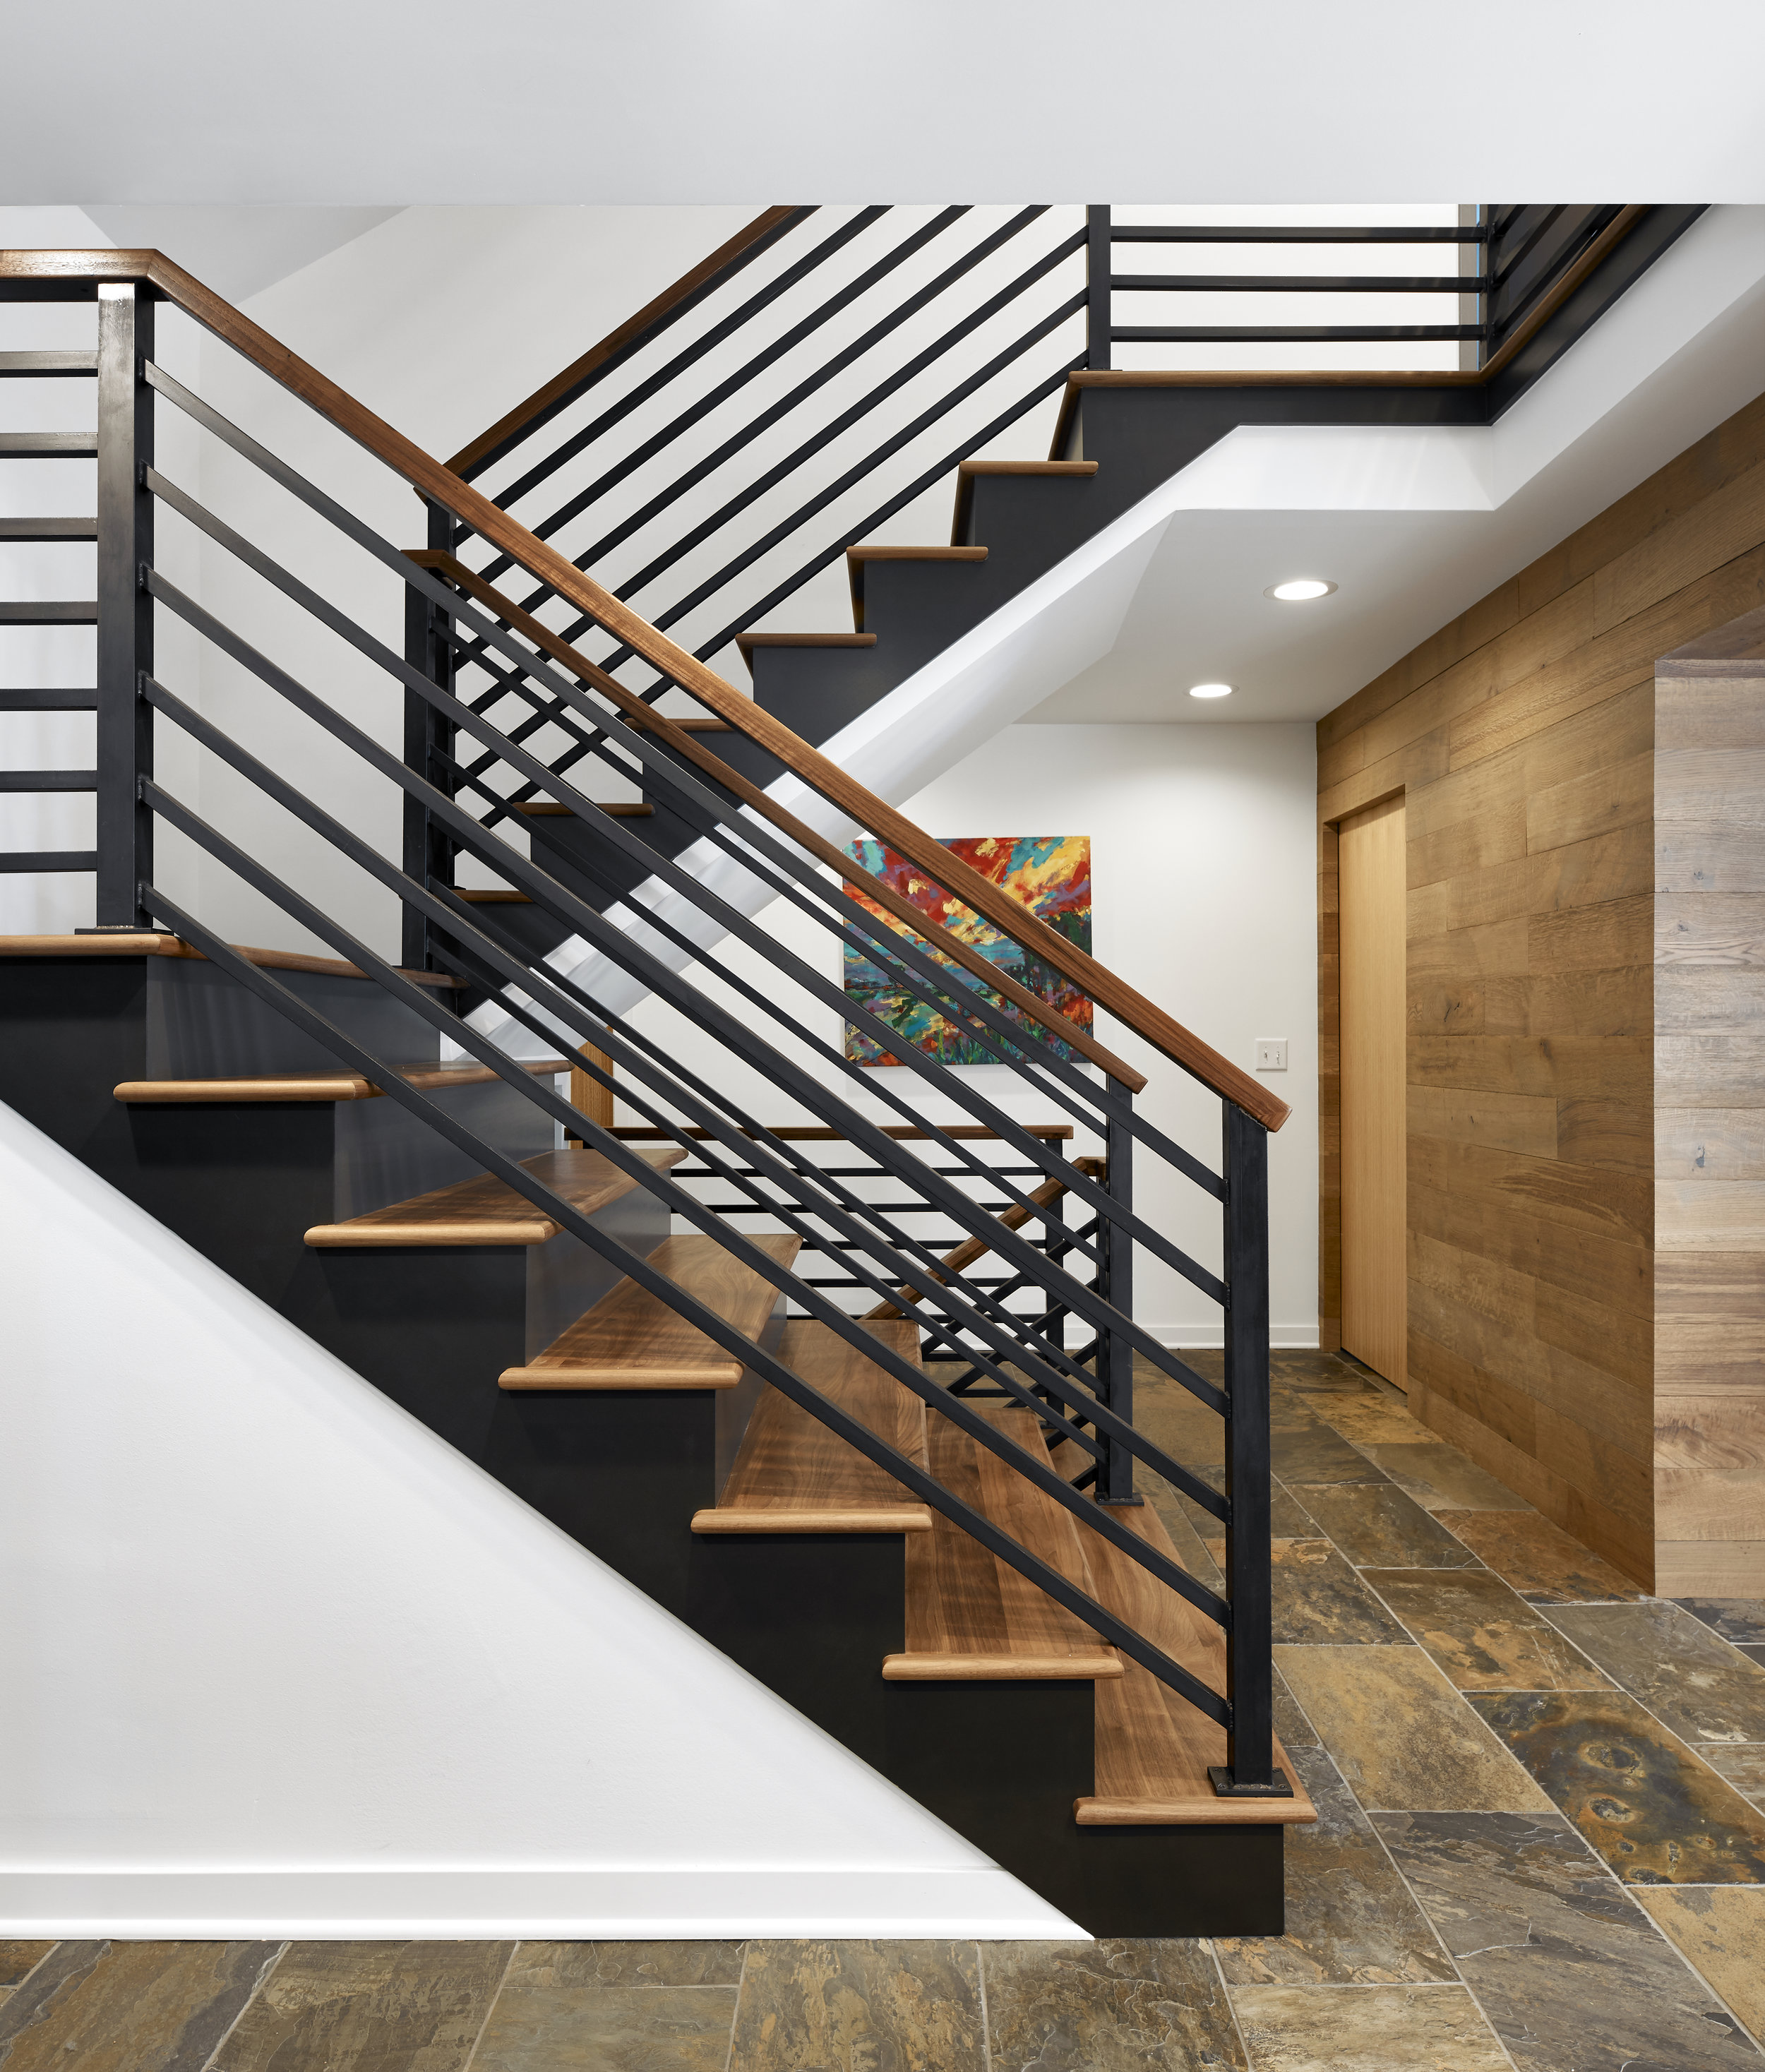 Dramatic steel and wood staircase, designed by NewStudio Architecture